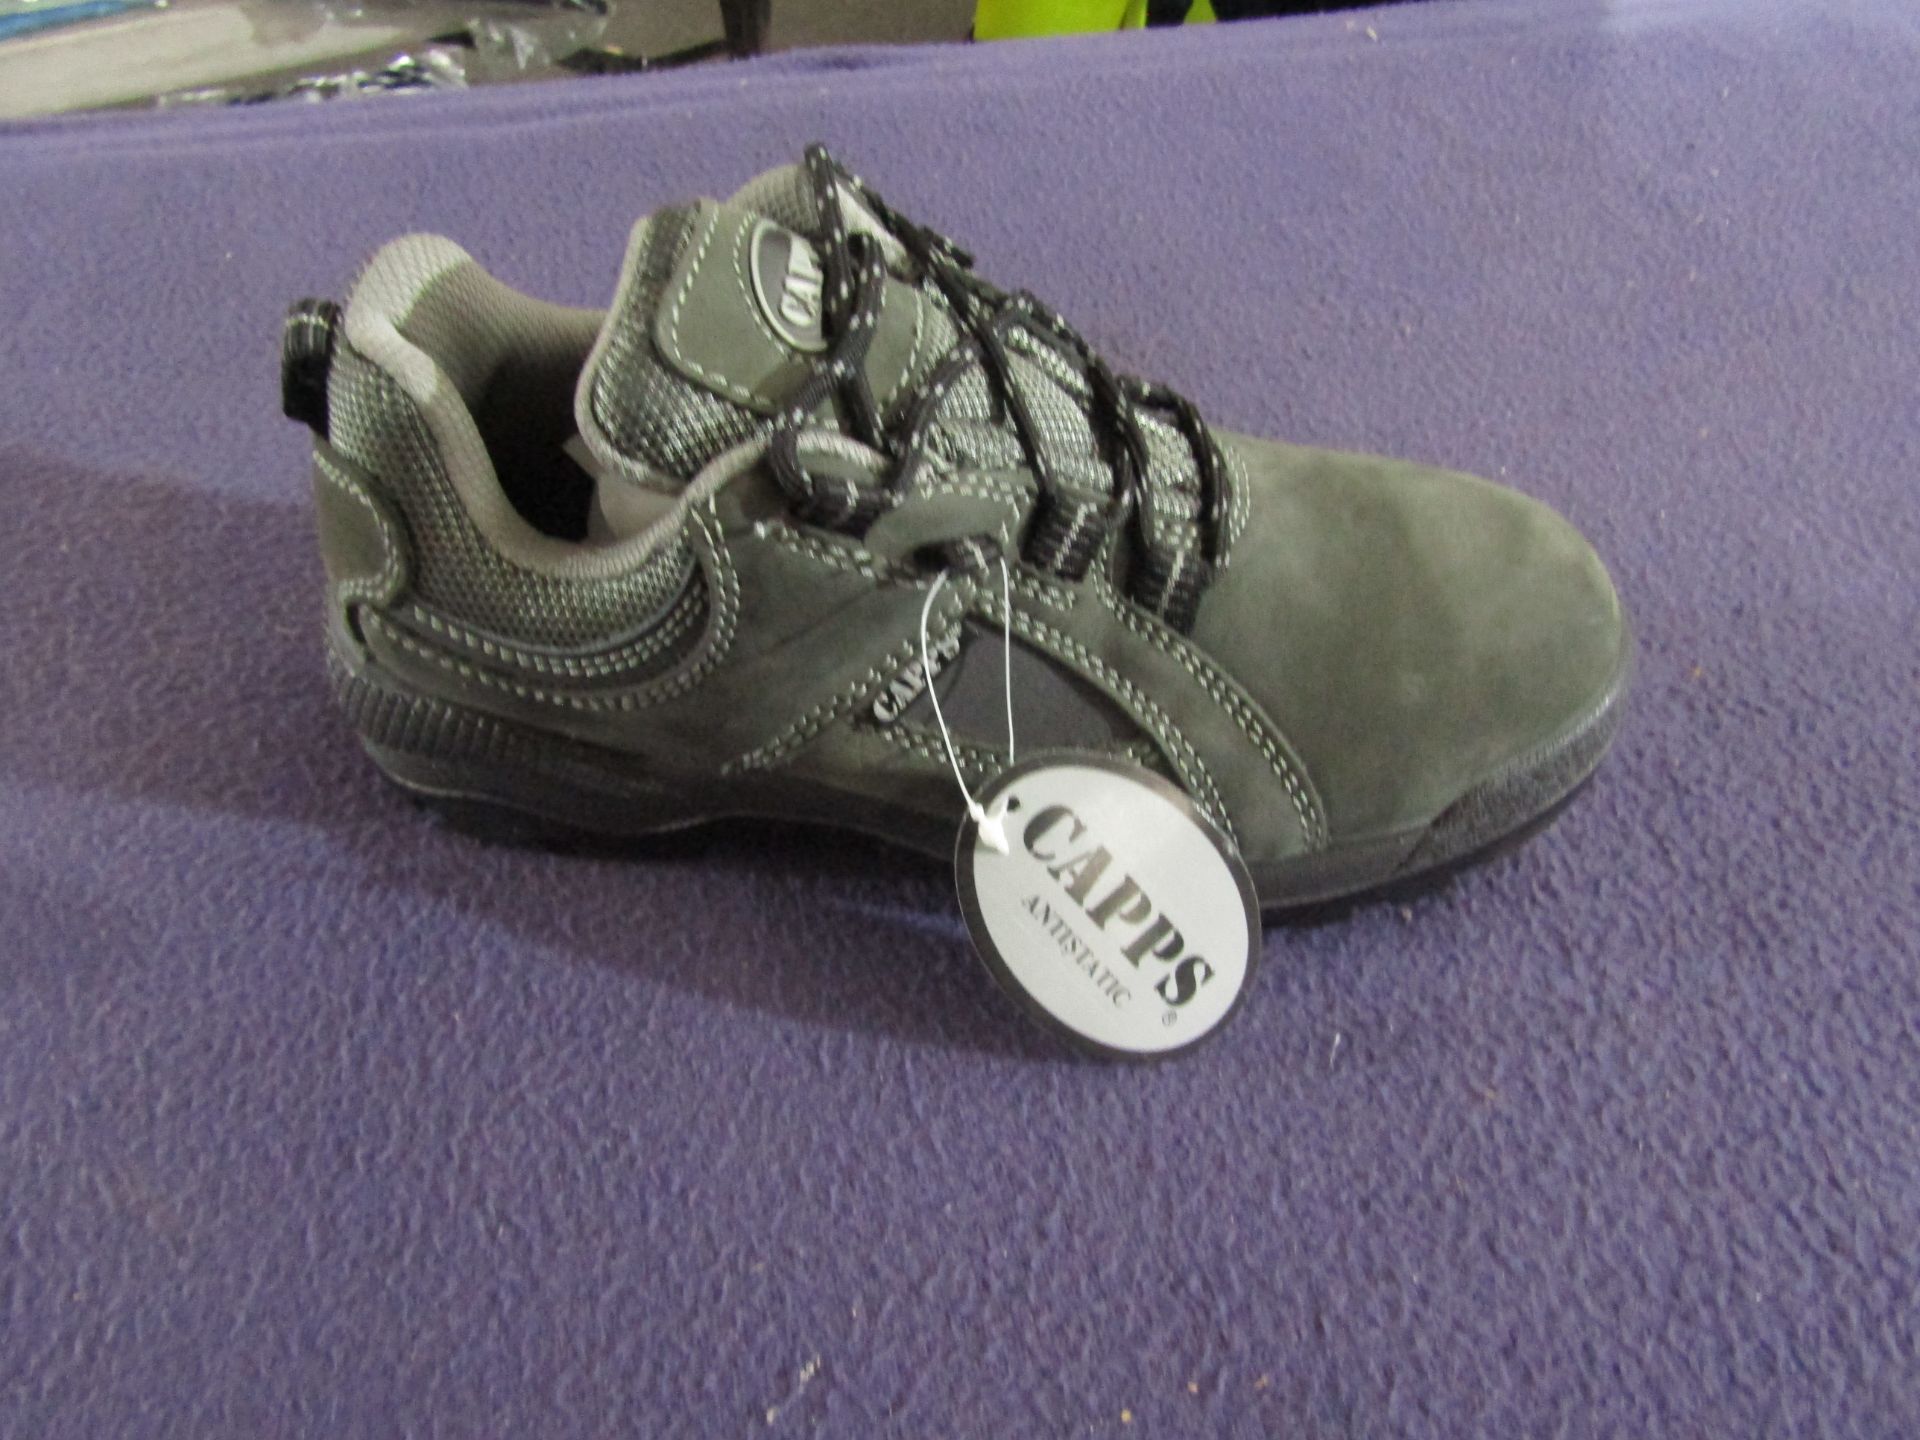 CAPPS - Nubuck Grey Leather trainers with Composite Toe Cap - Size 4 - Unused & Boxed.